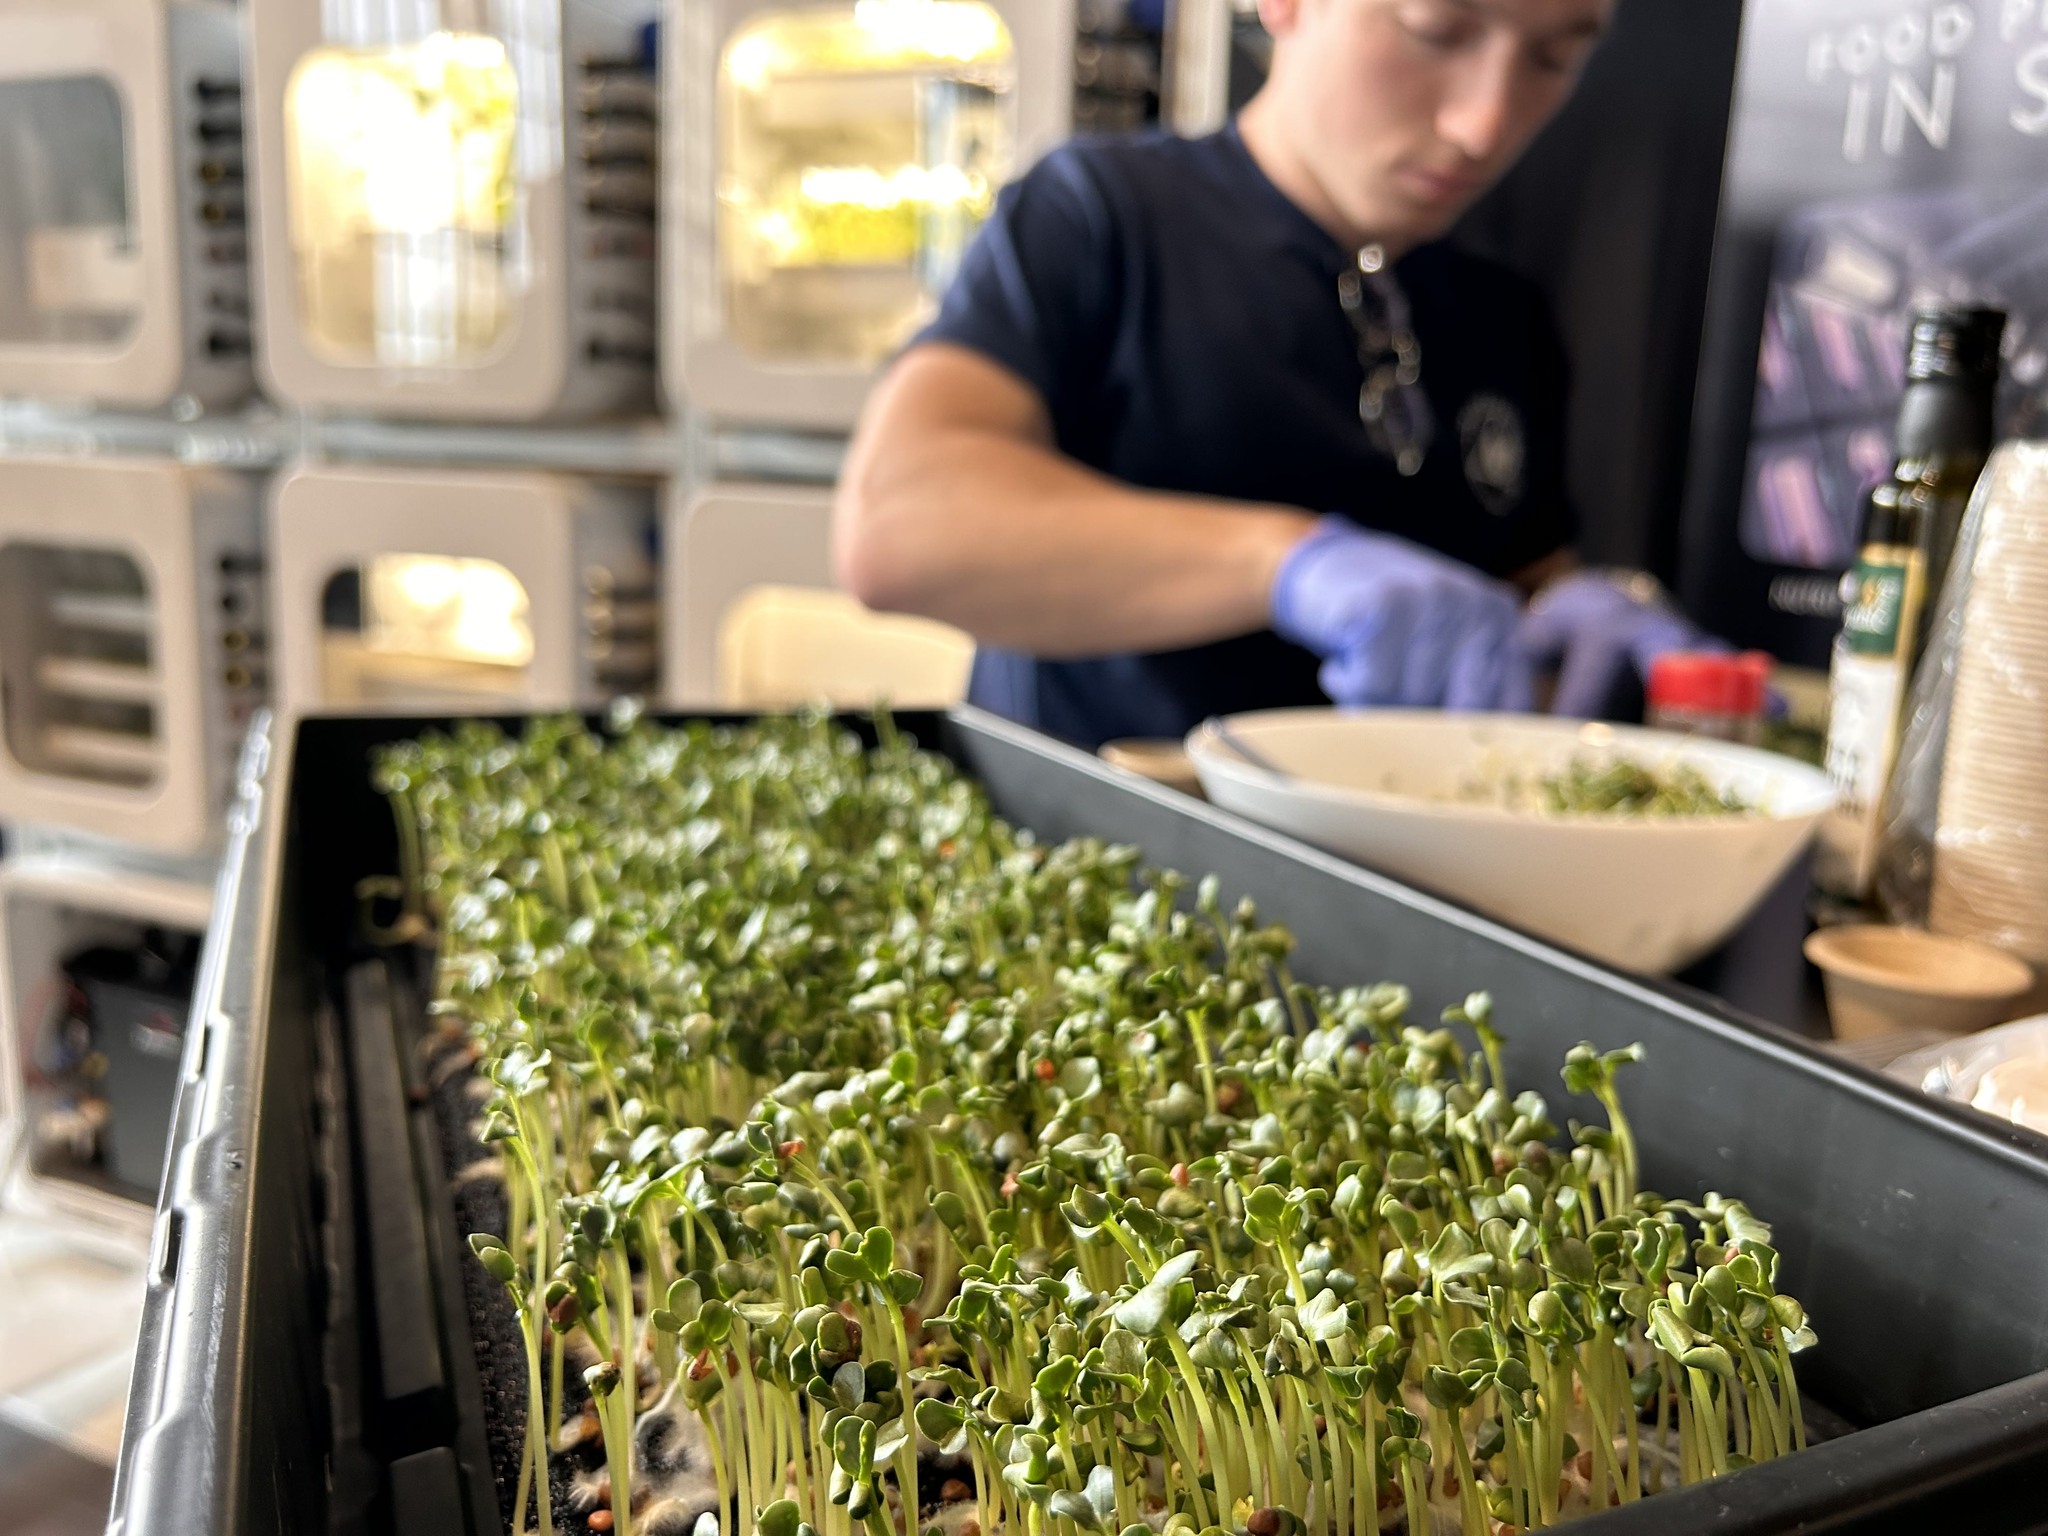 A black plastic tray full of green alfalfa sprouts is in full focus, taking up much of the photo. In the background, slightly out of focus, a white man is wearing a navy t-shirt and light blue gloves as he works on preparing some sprouts to be eaten as samples. The background includes a large white bowl full of greens, small sample cups, and a bottle of oil. Behind the man is an incubation station where his team’s food system is displayed.